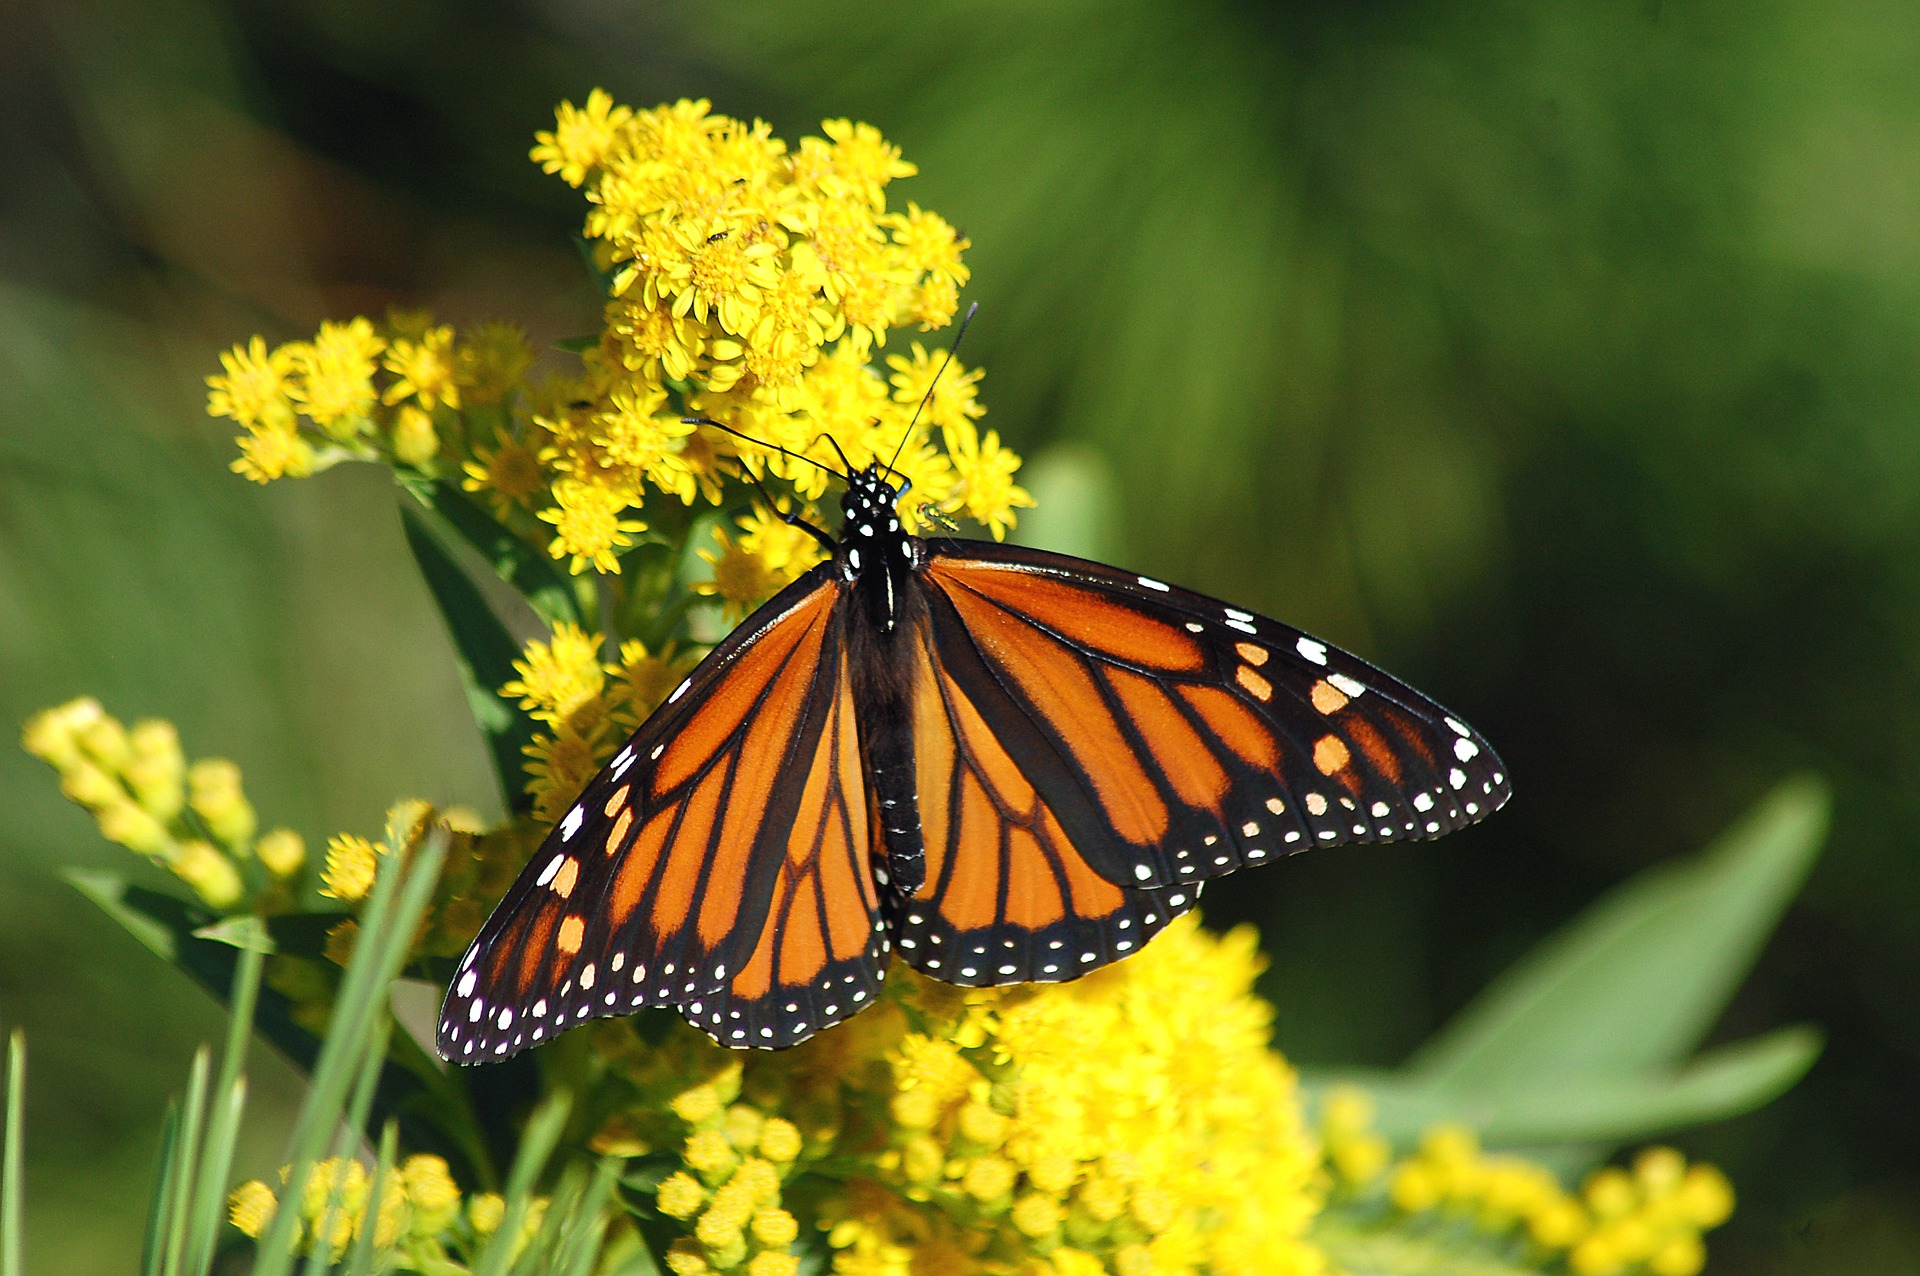 Only 29,000 western monarch butterflies were found in California this year – down from millions.